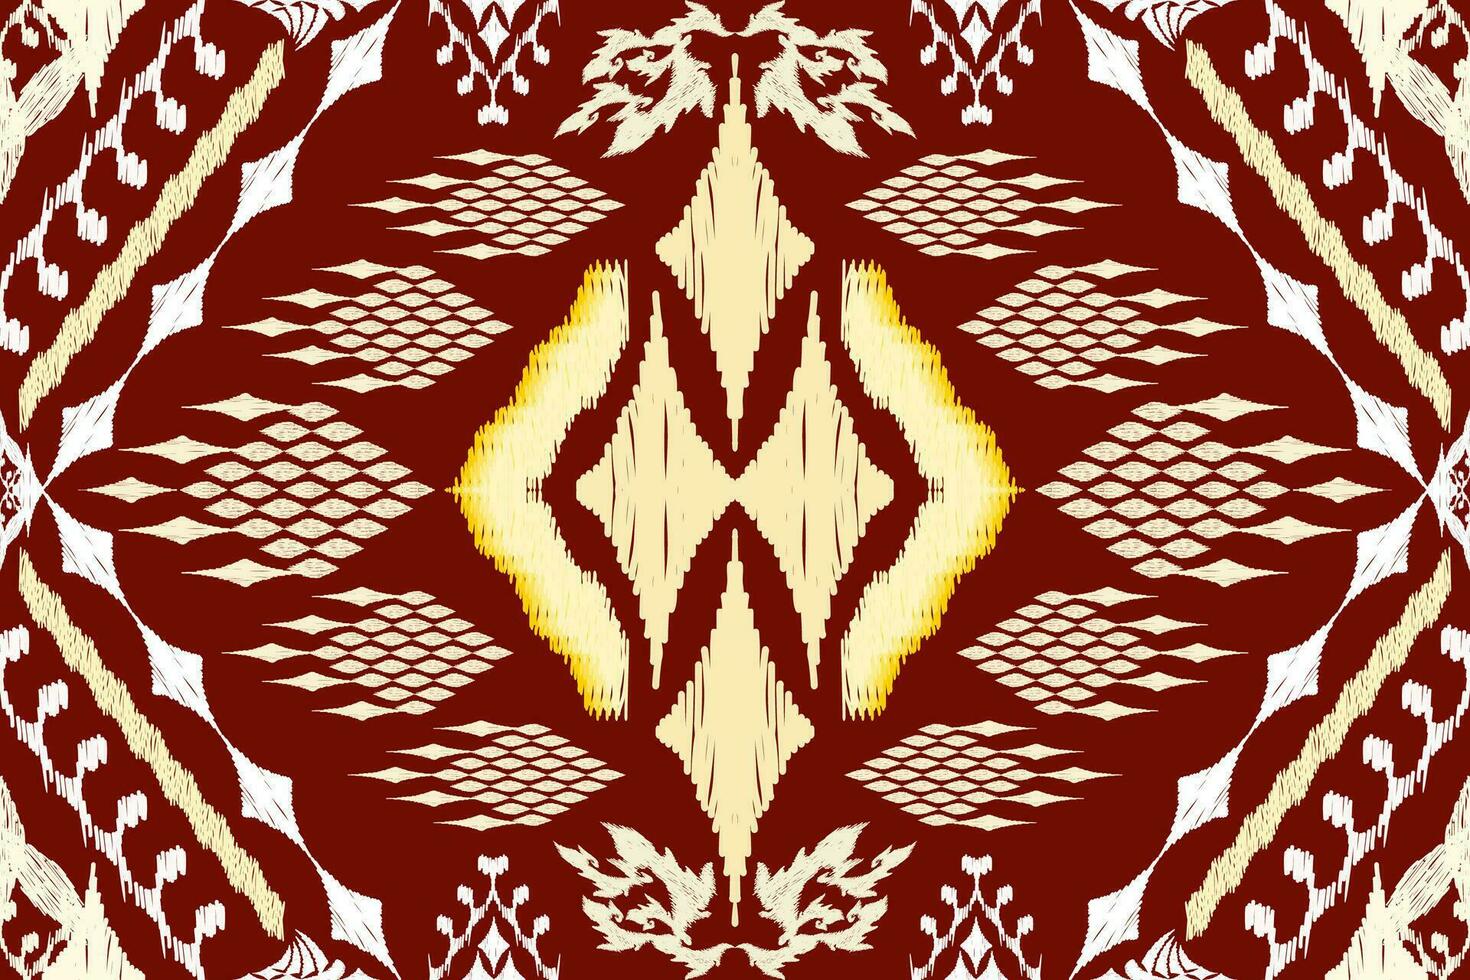 Geometric ethnic aztec embroidery style.Figure ikat oriental traditional art pattern.Design for ethnic background,wallpaper,fashion,clothing,wrapping,fabric,element,sarong,graphic,vector illustration. vector